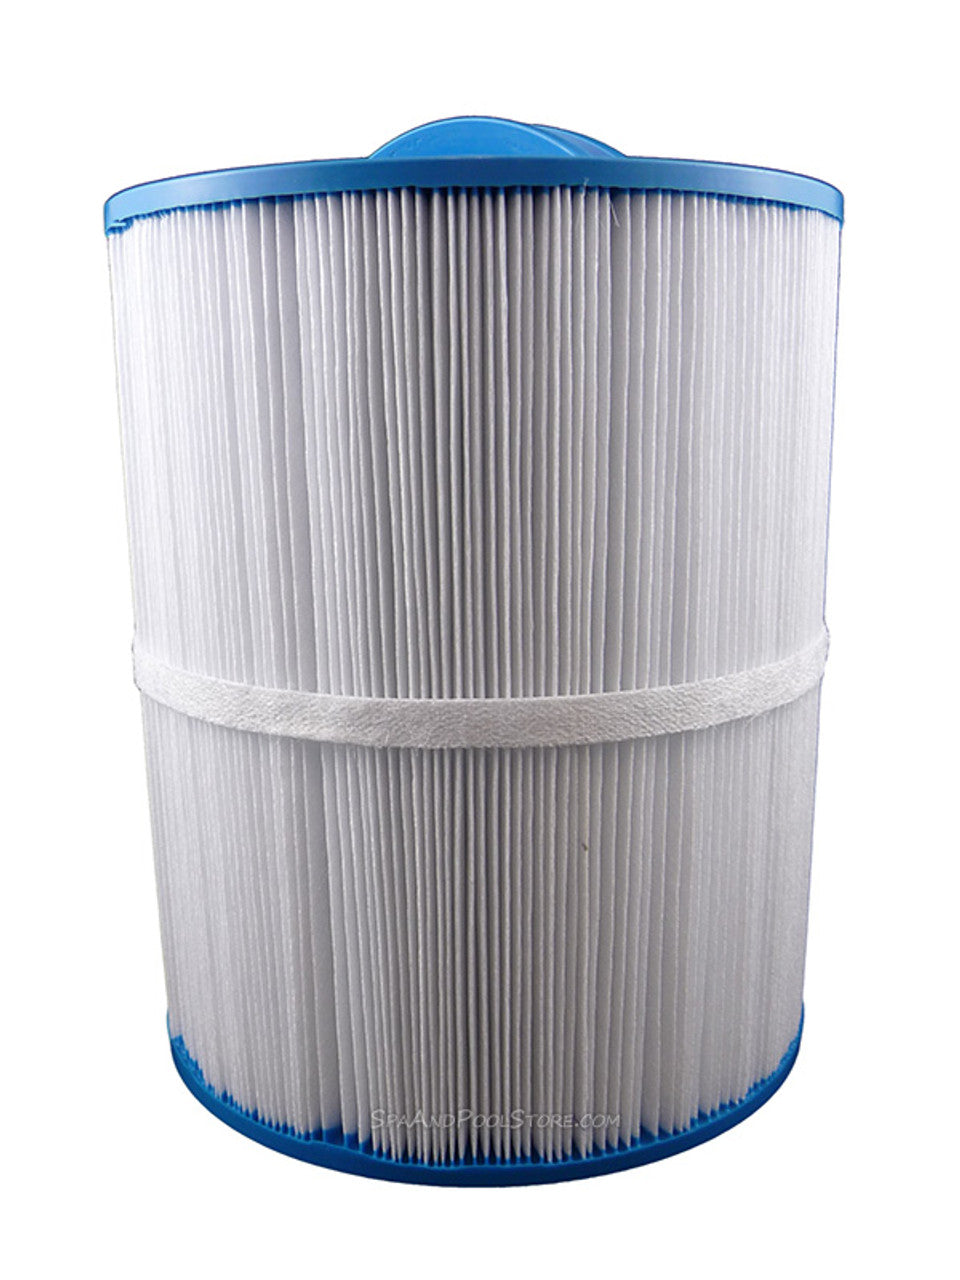 Ak-90161 25 Sq ft Replacement filter for Artesian Spas 06-0005-12,  FC-0311, PAS50SV- F2M, 6CH-502, 60506